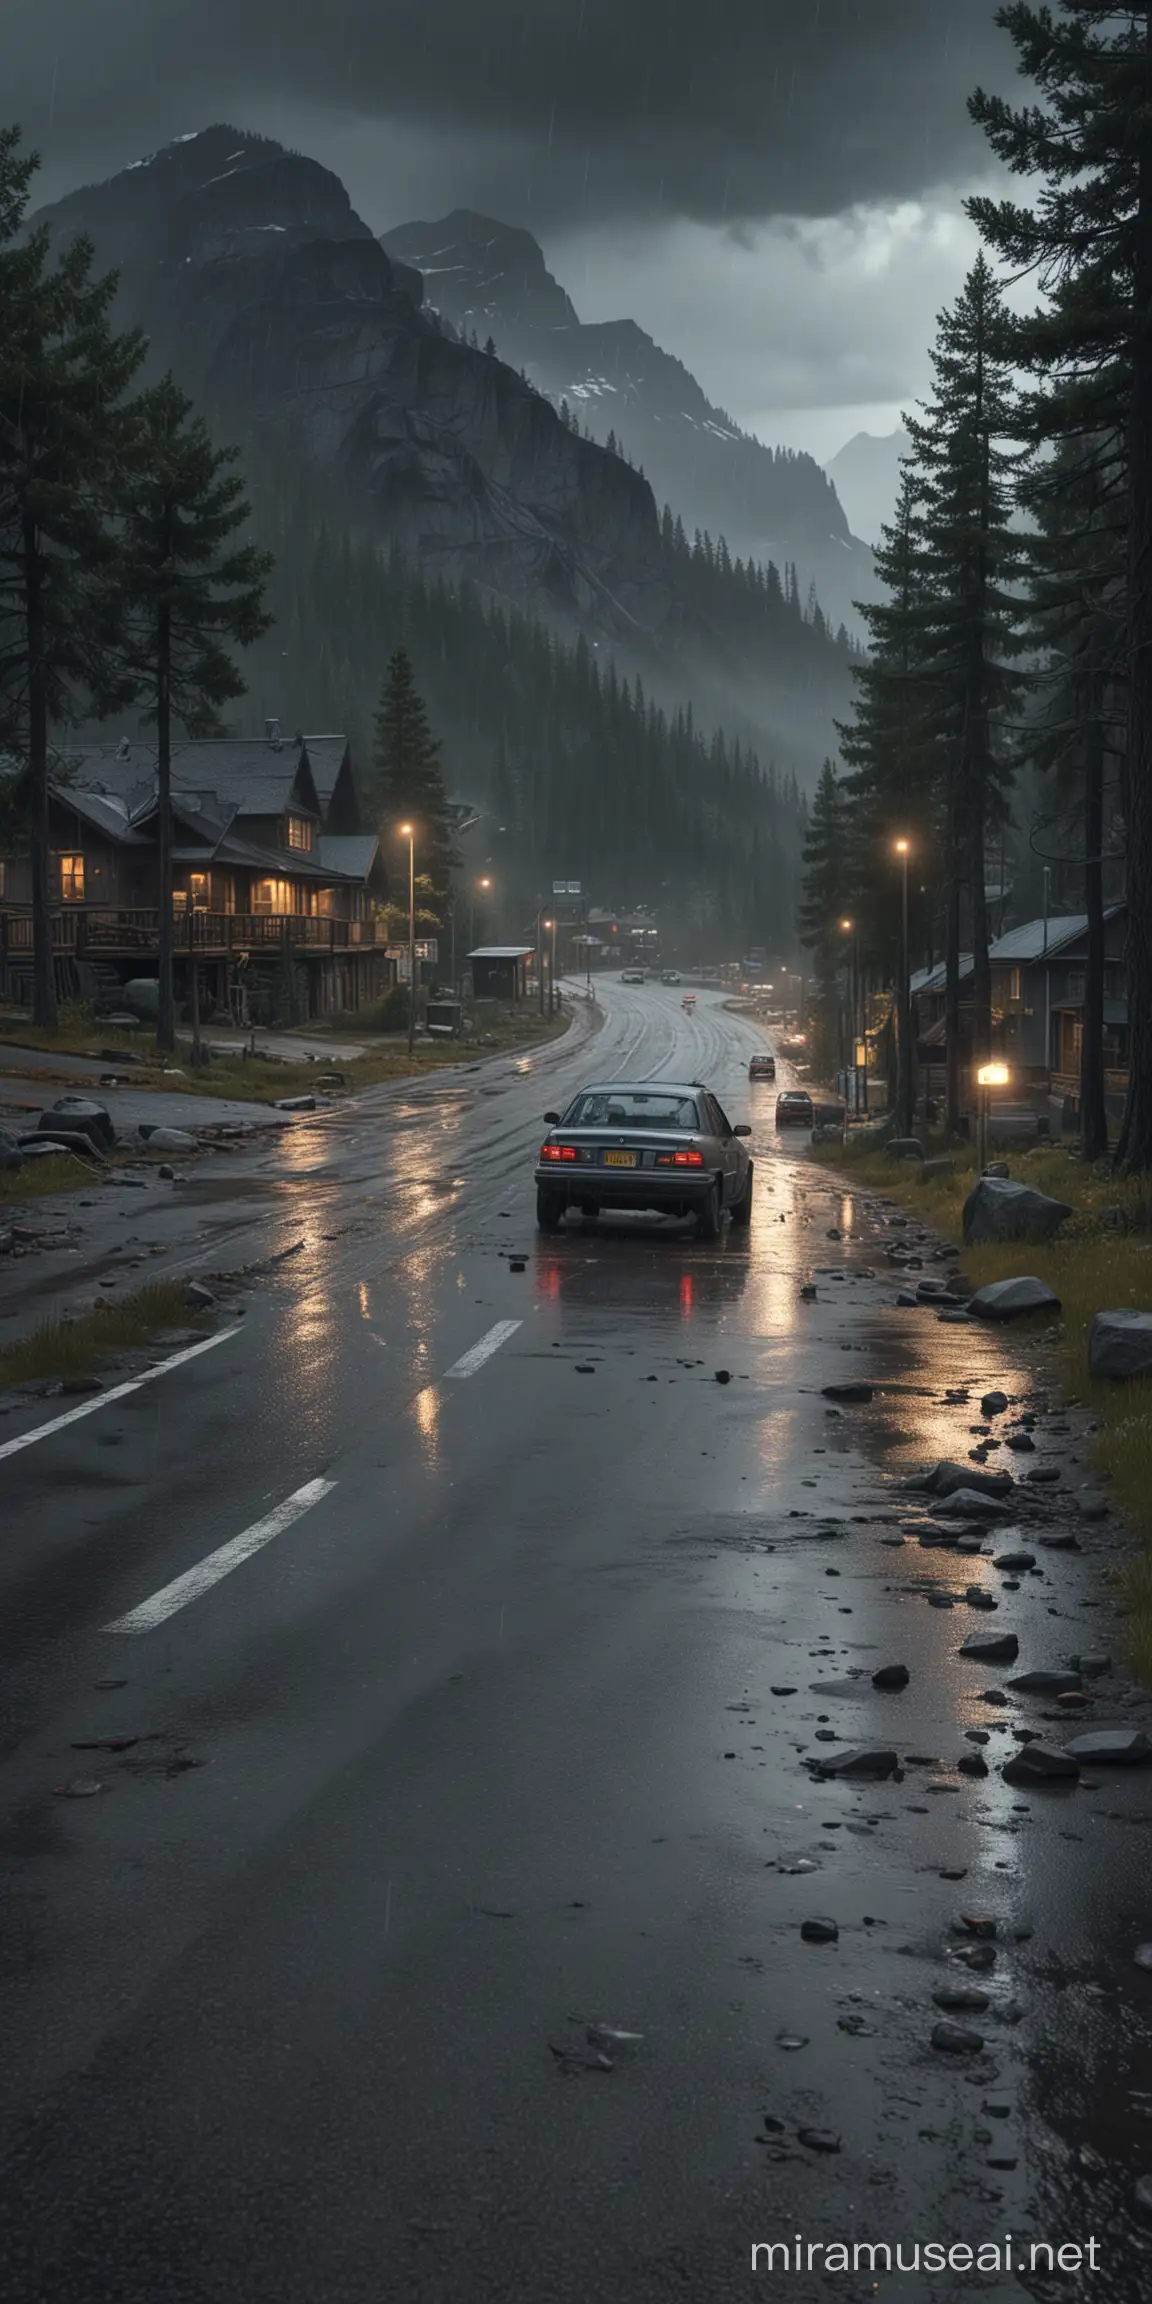 Rainy Night in a Remote Canadian Town with Mountains and Pine Forest